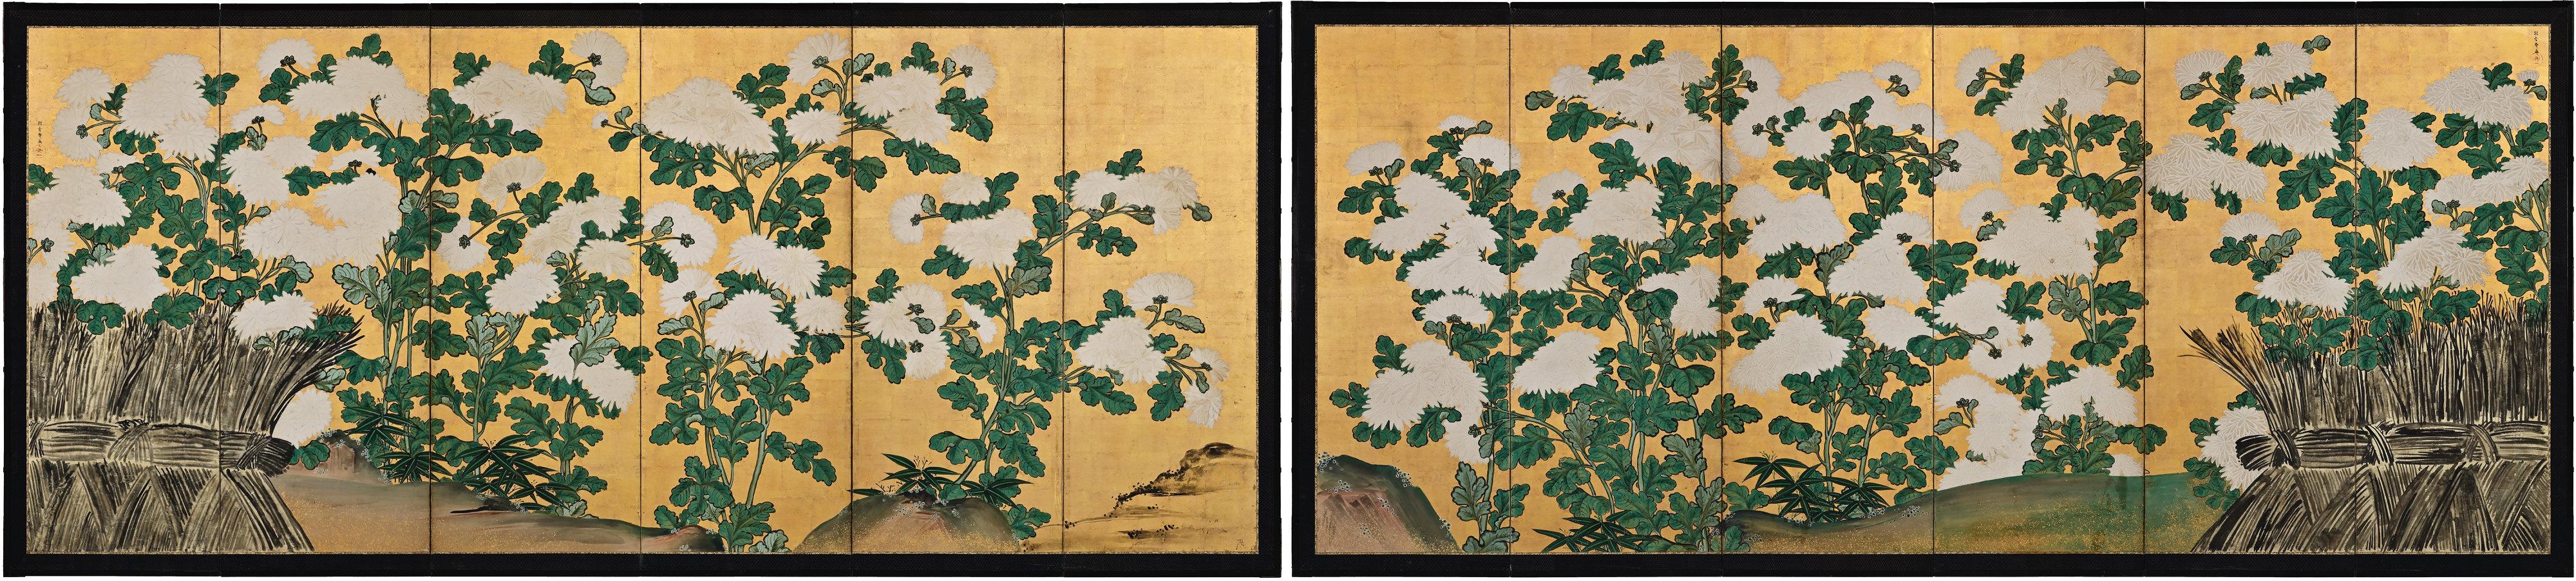 Omori Soun (b. 1704)

Chrysanthemums - One Hundred Flowers

A Pair of Six-fold Japanese Screens. Ink, color, gofun and gold leaf on paper.

Dating to the mid 18th century this pair of six-panel Japanese screens feature a profusion of large, full